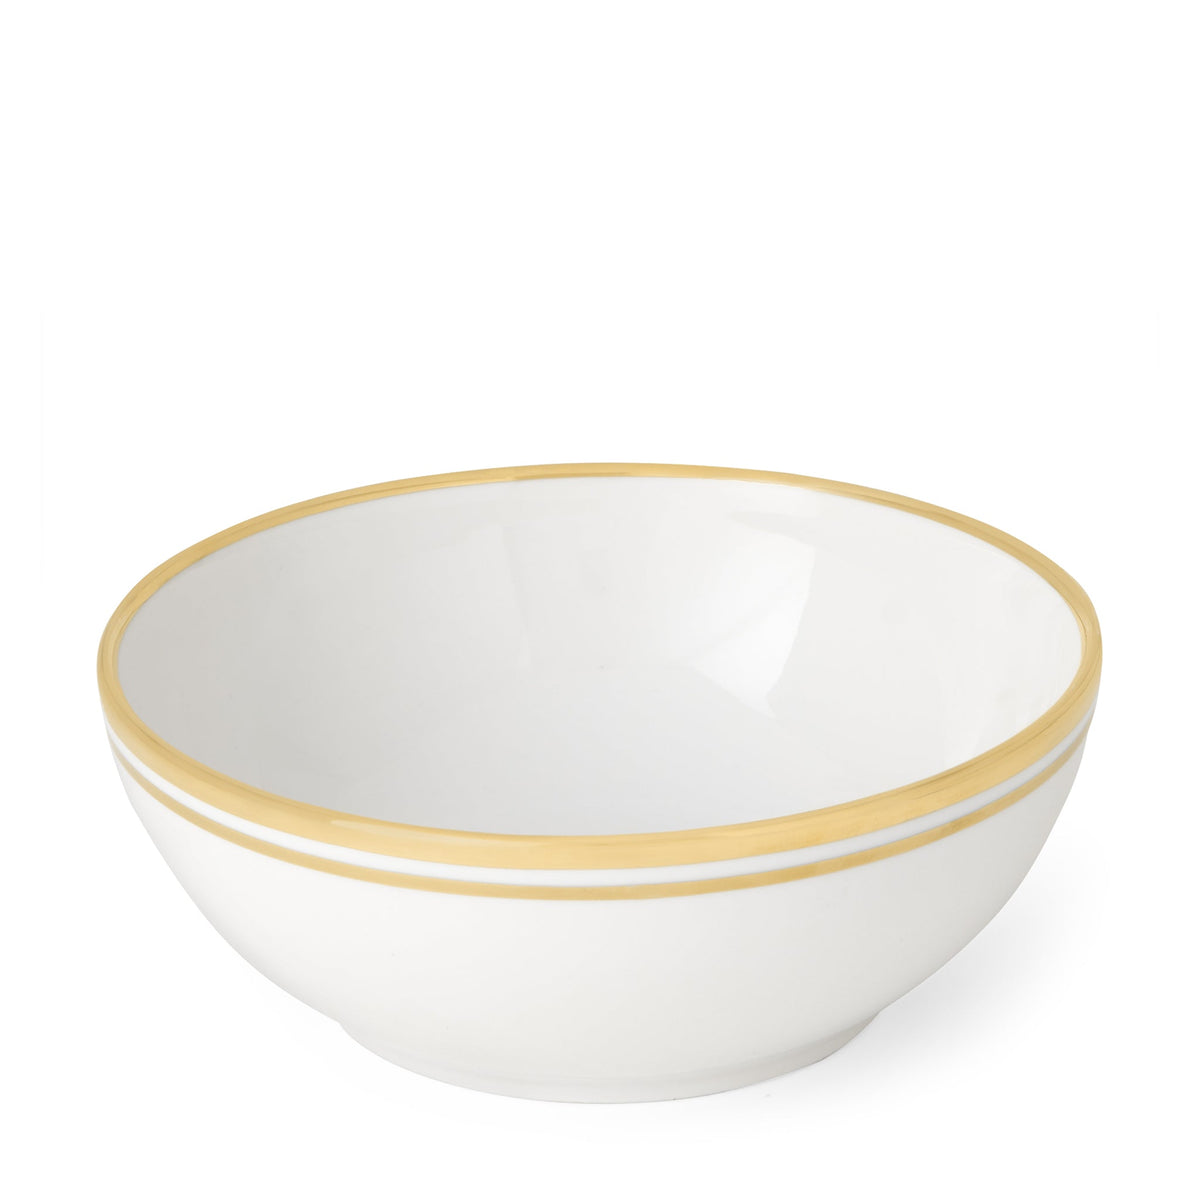 WILSHIRE CEREAL BOWL WHITE GOLD